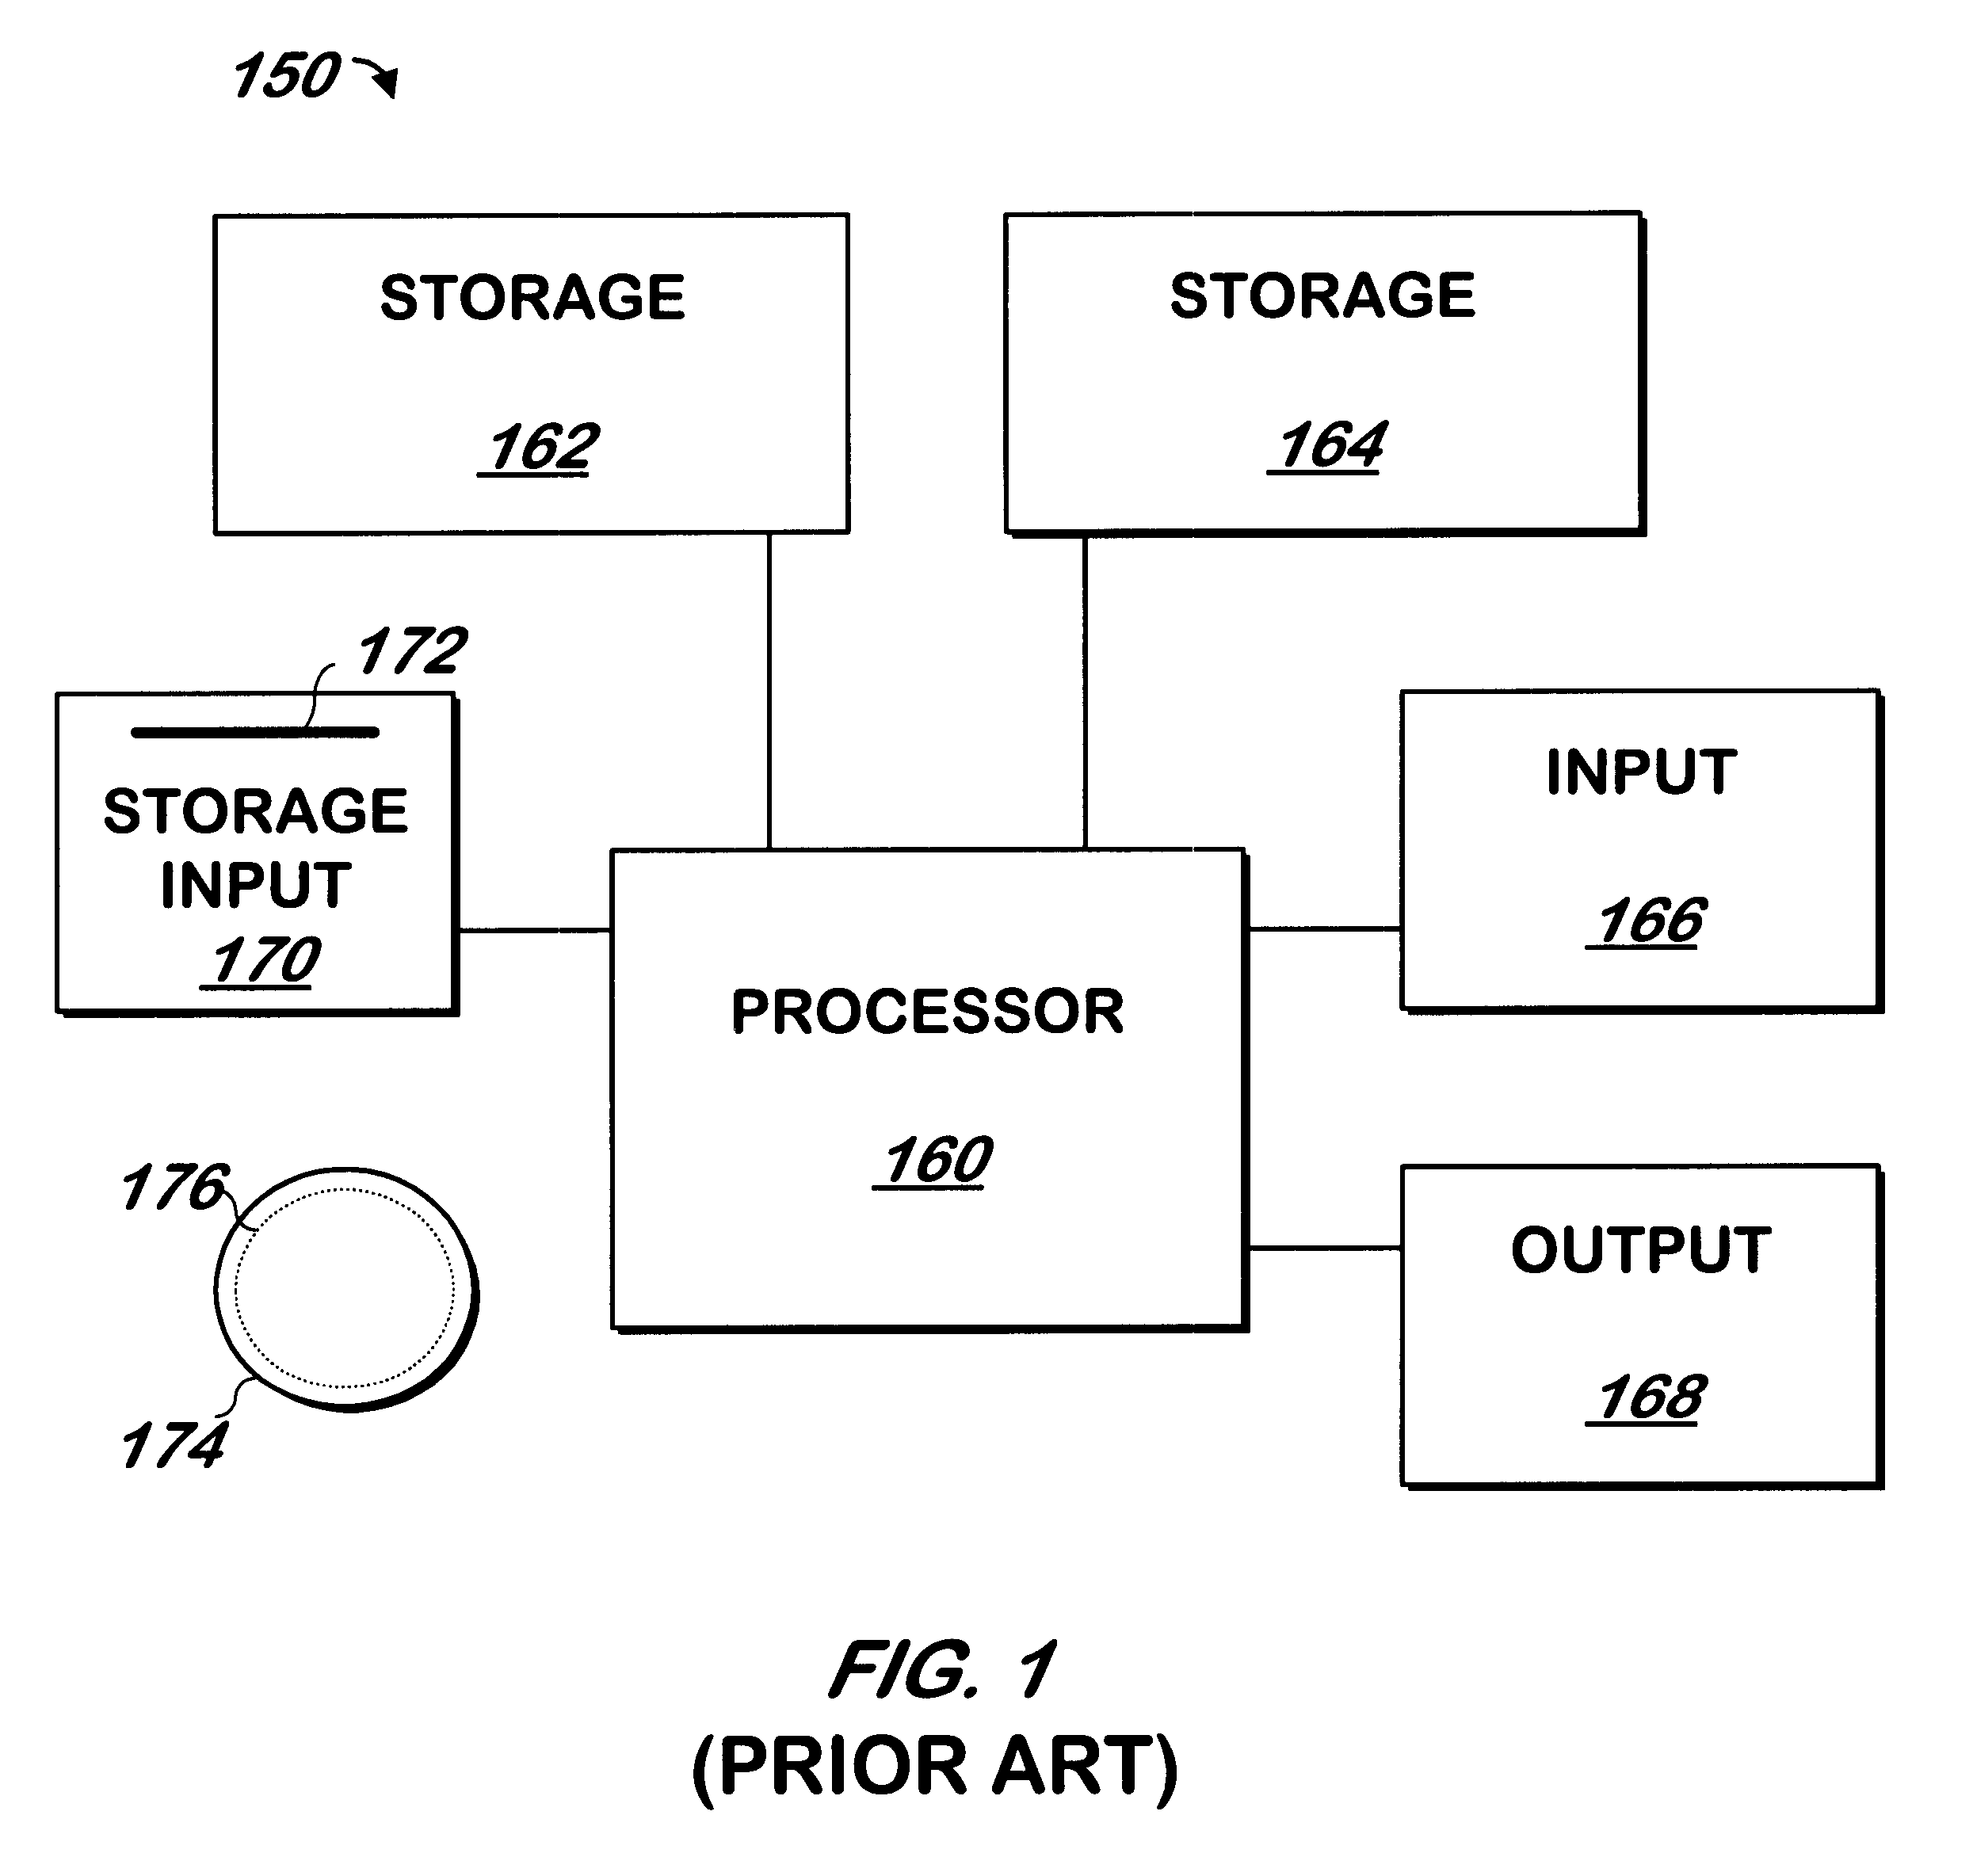 Method and apparatus for converting files stored on a mainframe computer for use by a client computer